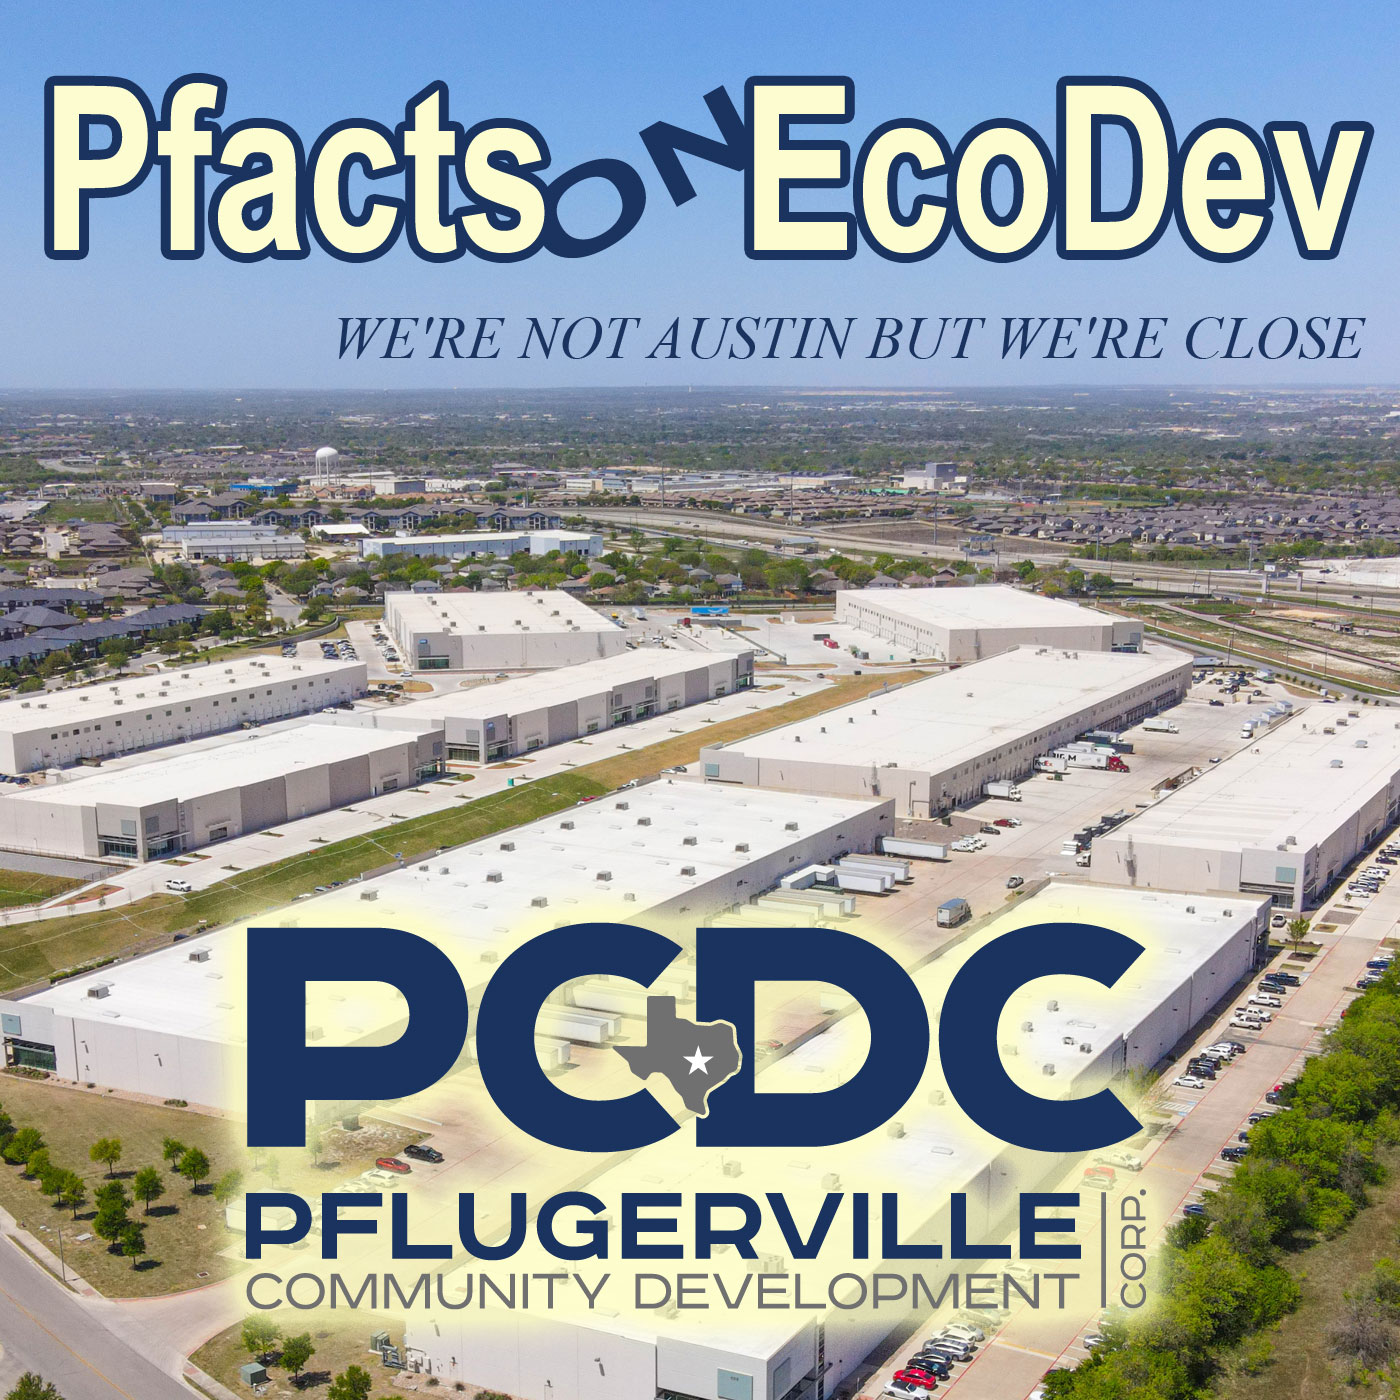 skyview of industrial park for Pfacts on EcoDev